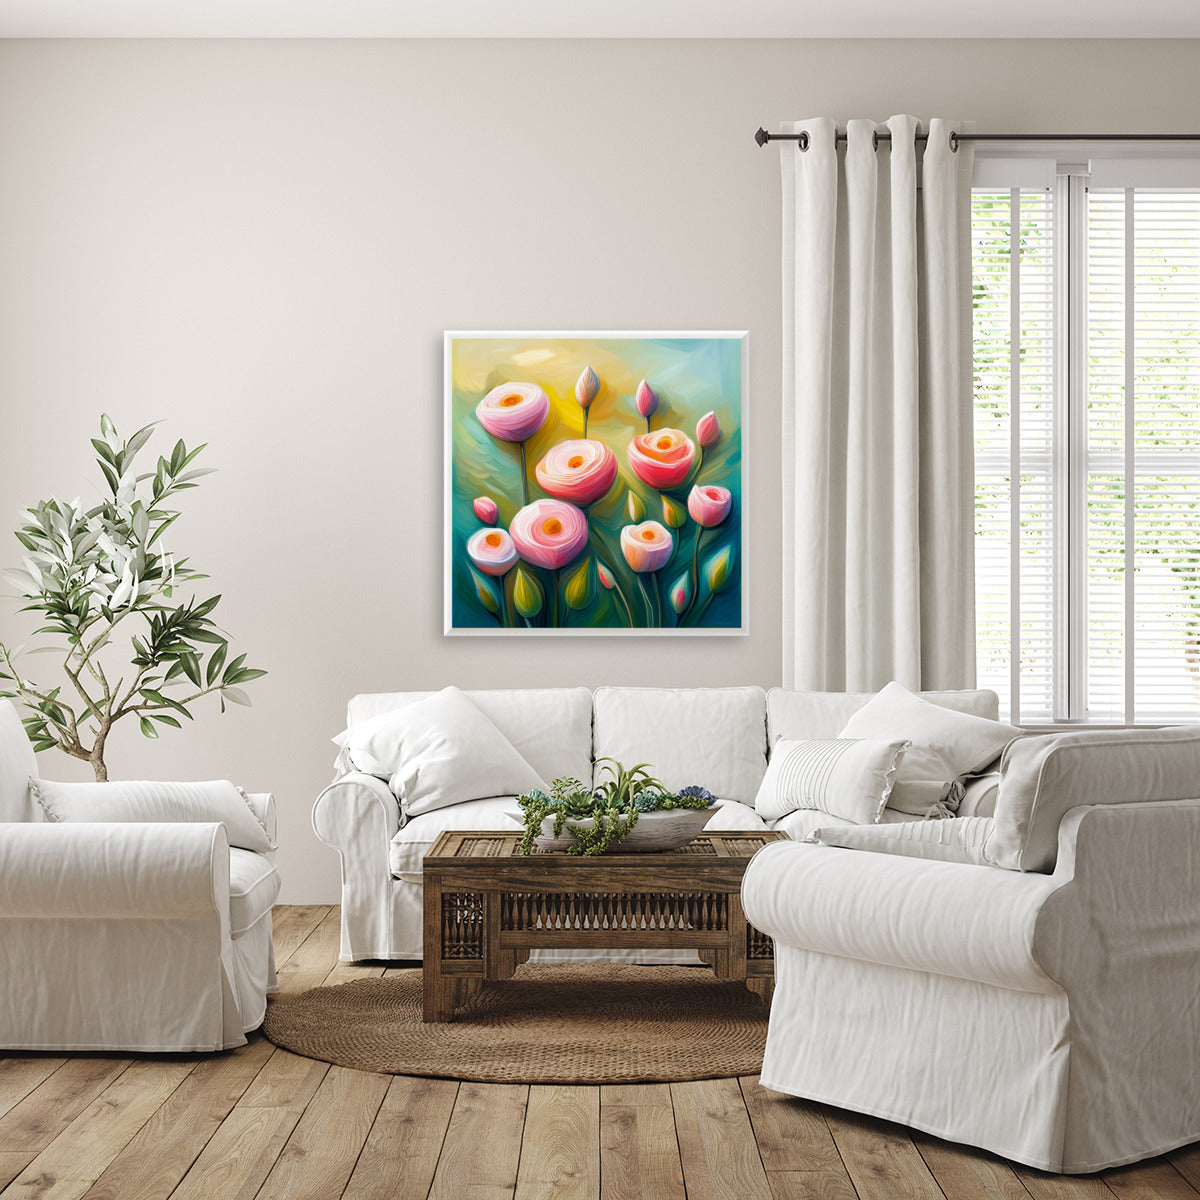 An enchanting piece of pastel colorful wall art showcasing a soothing balance of soft colors.